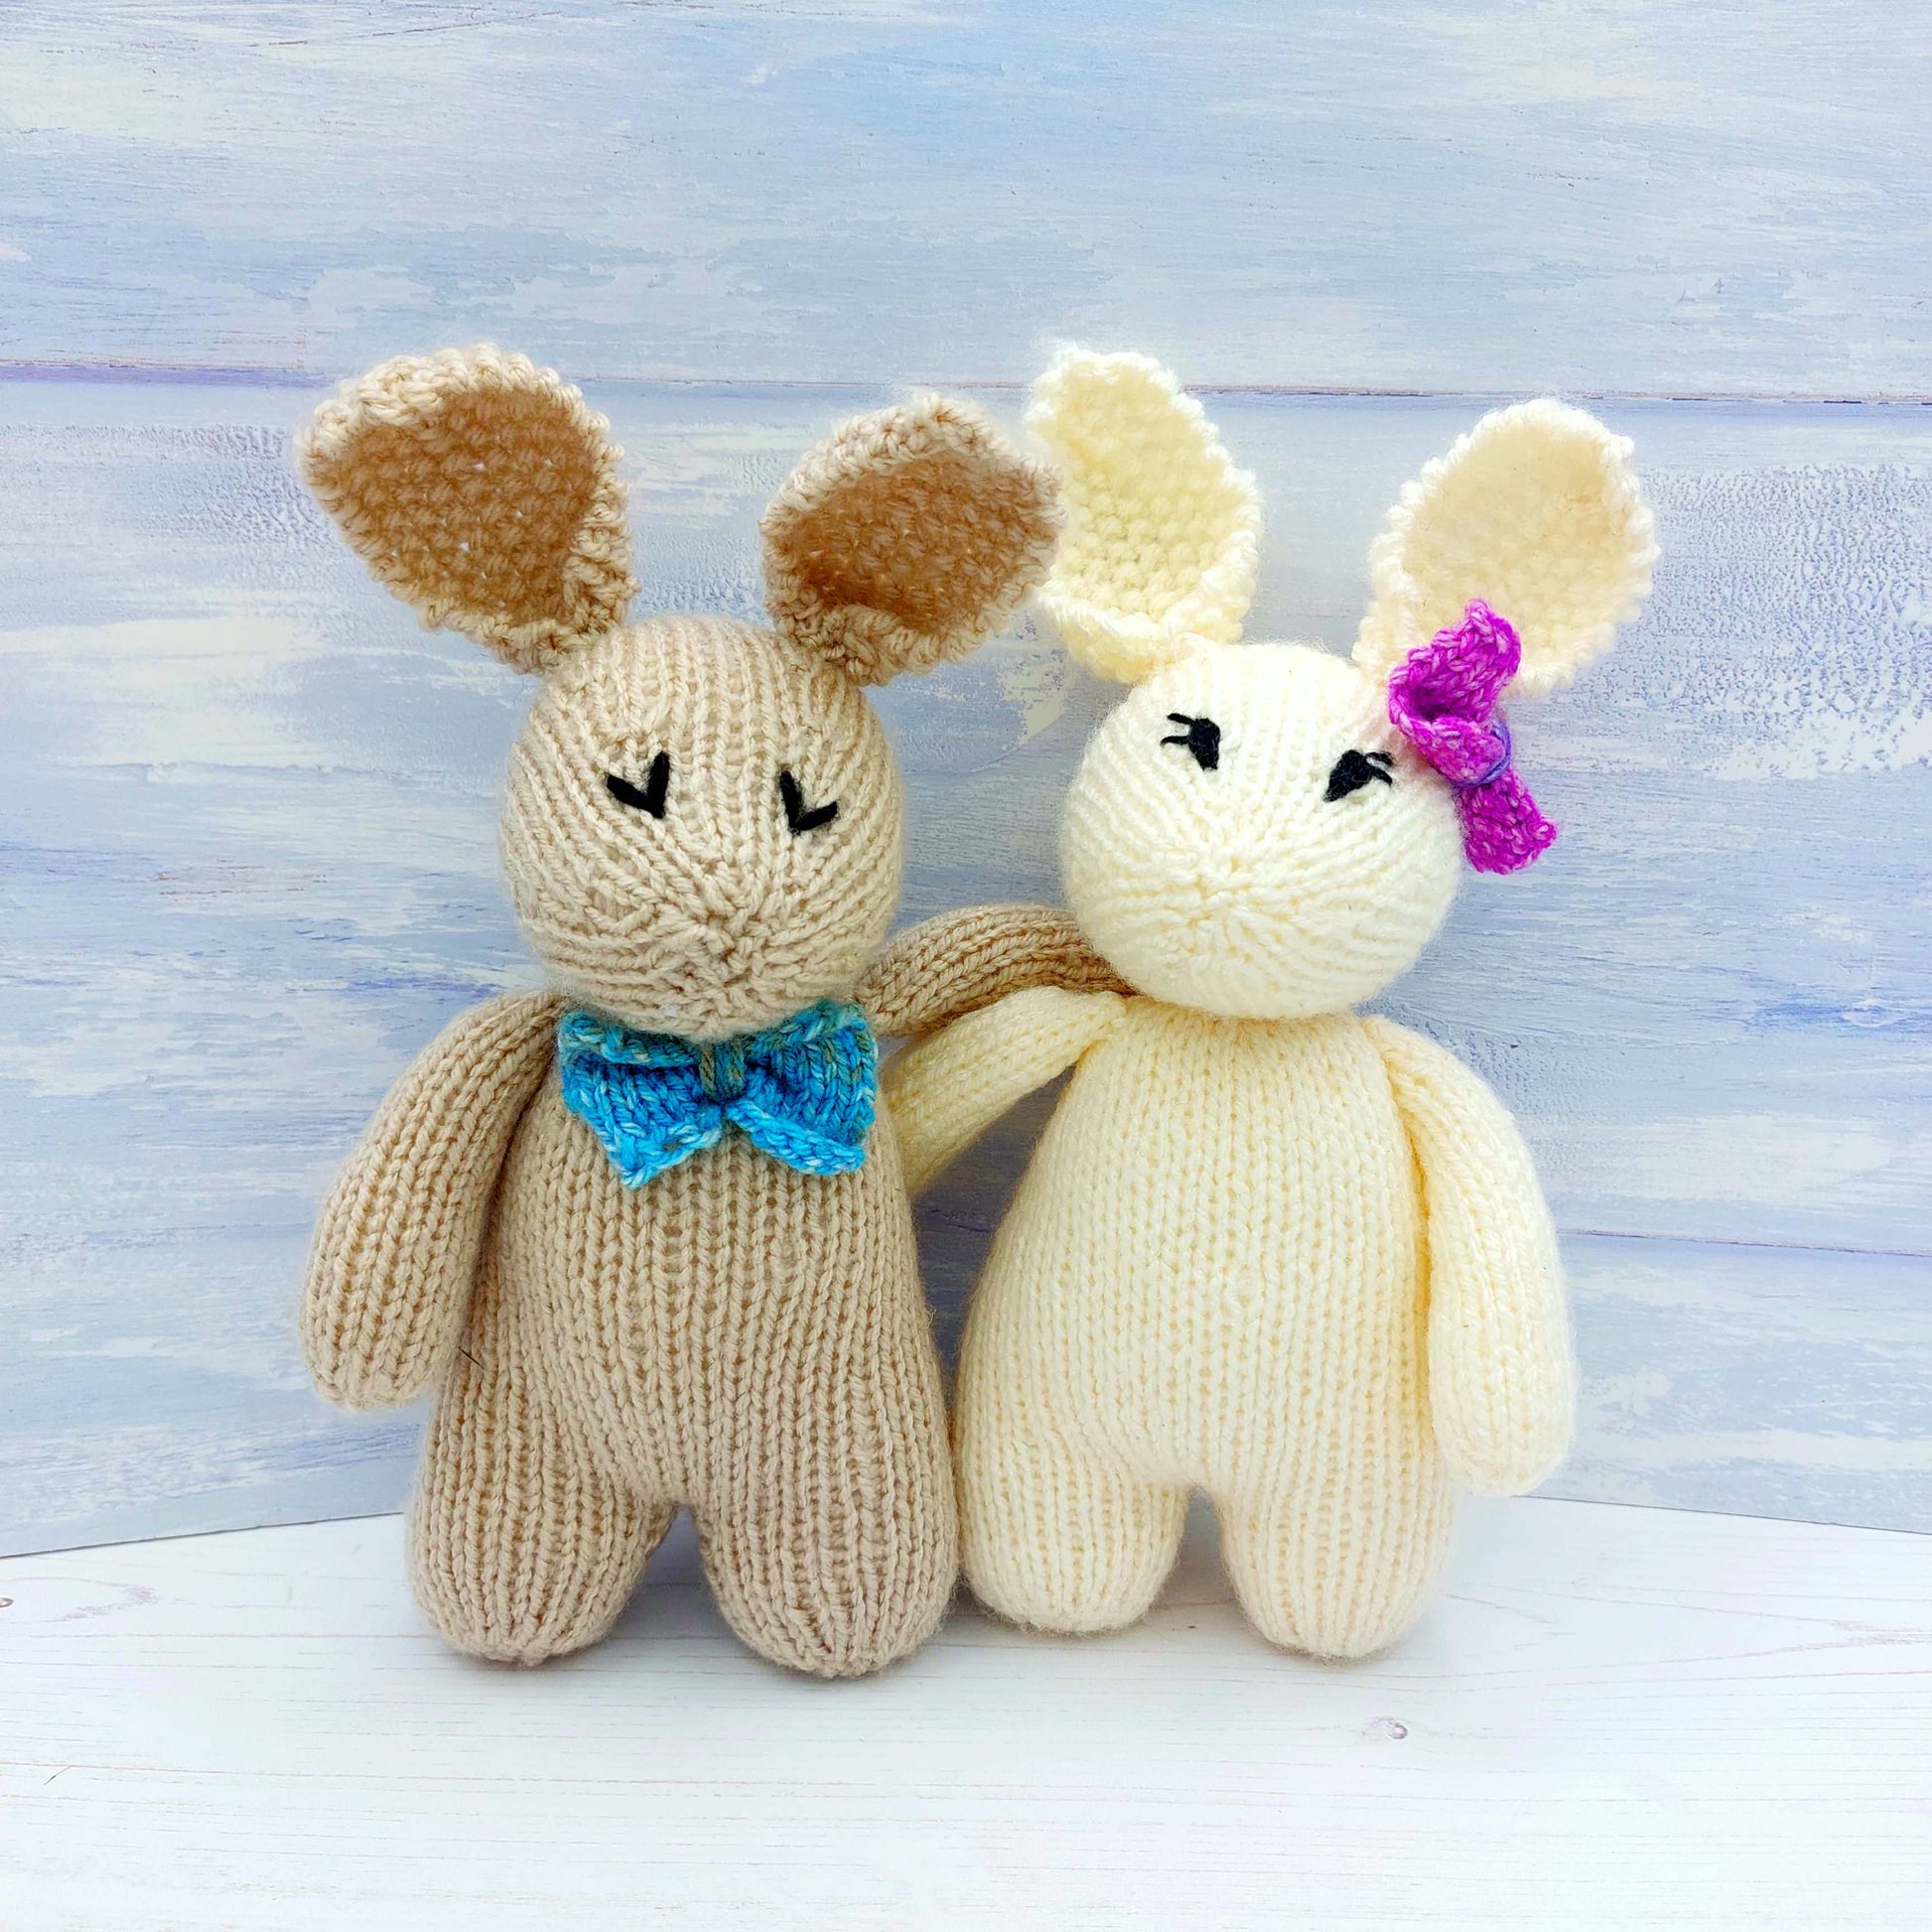 Toy Knitted Bunny Rabbits made from Knitting Kit